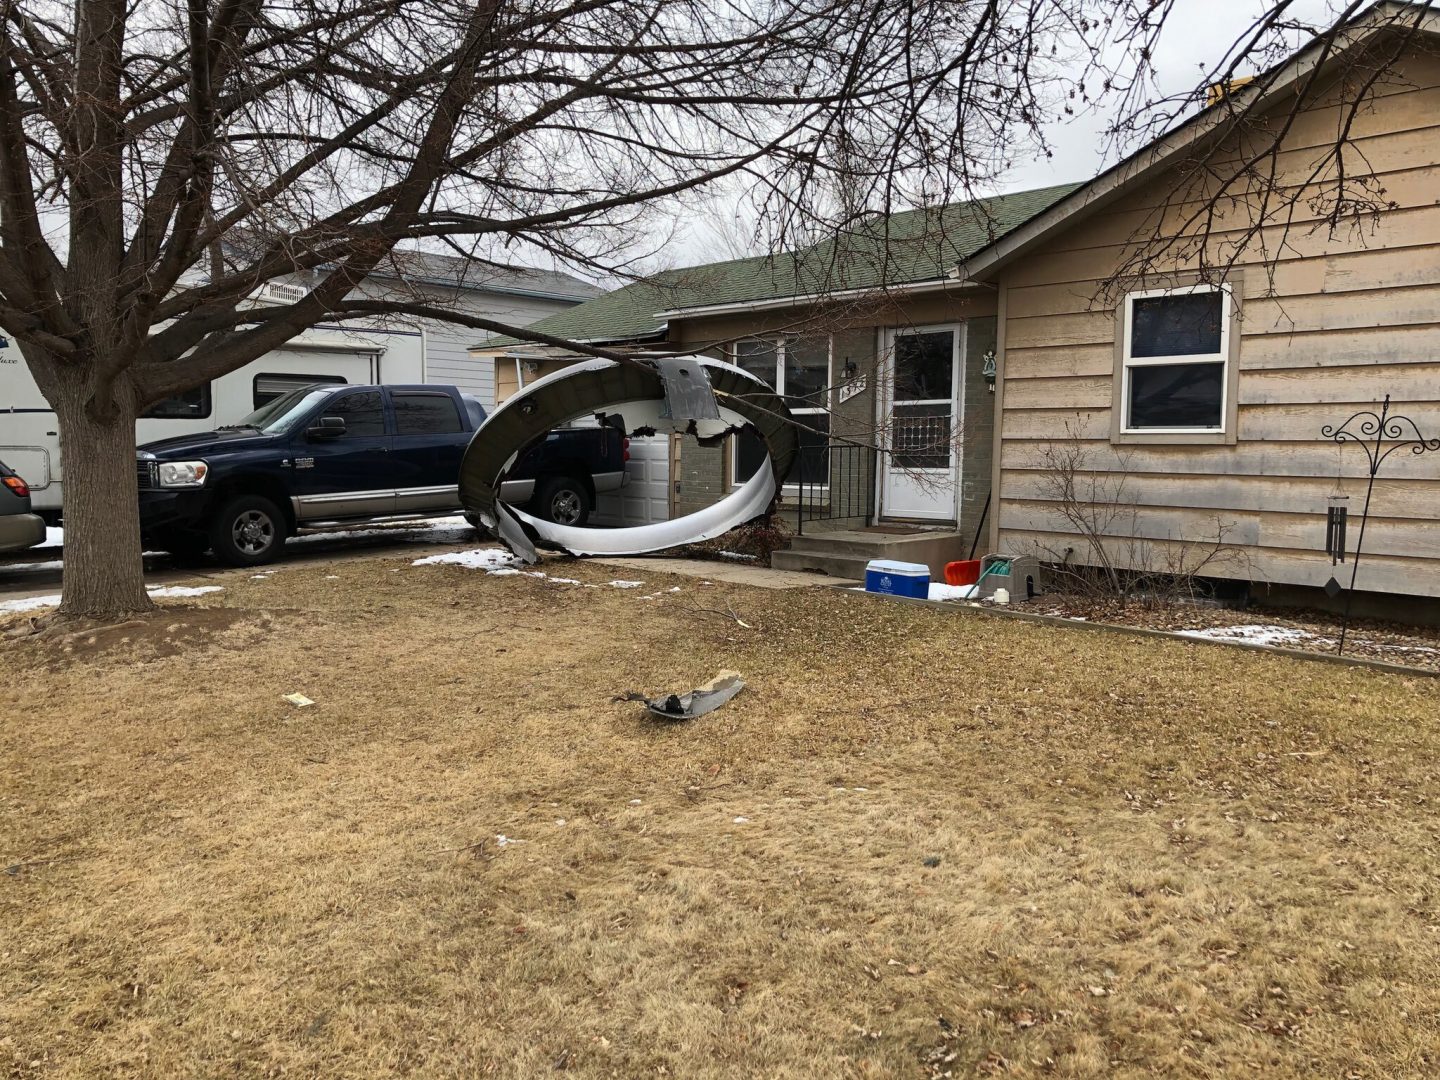 In this photo provided by the Broomfield Police Department on Twitter, debris is scattered in the front yard of a house at near 13th and Elmwood, Saturday, Feb. 20, 2021, in Broomfield, Colo. A commercial airliner dropped debris in Colorado neighborhoods during an emergency landing Saturday. The Broomfield Police Department said on Twitter that the plane landed safely at Denver International Airport and that no injuries had been reported from the incident.  (Broomfield Police Department via AP)